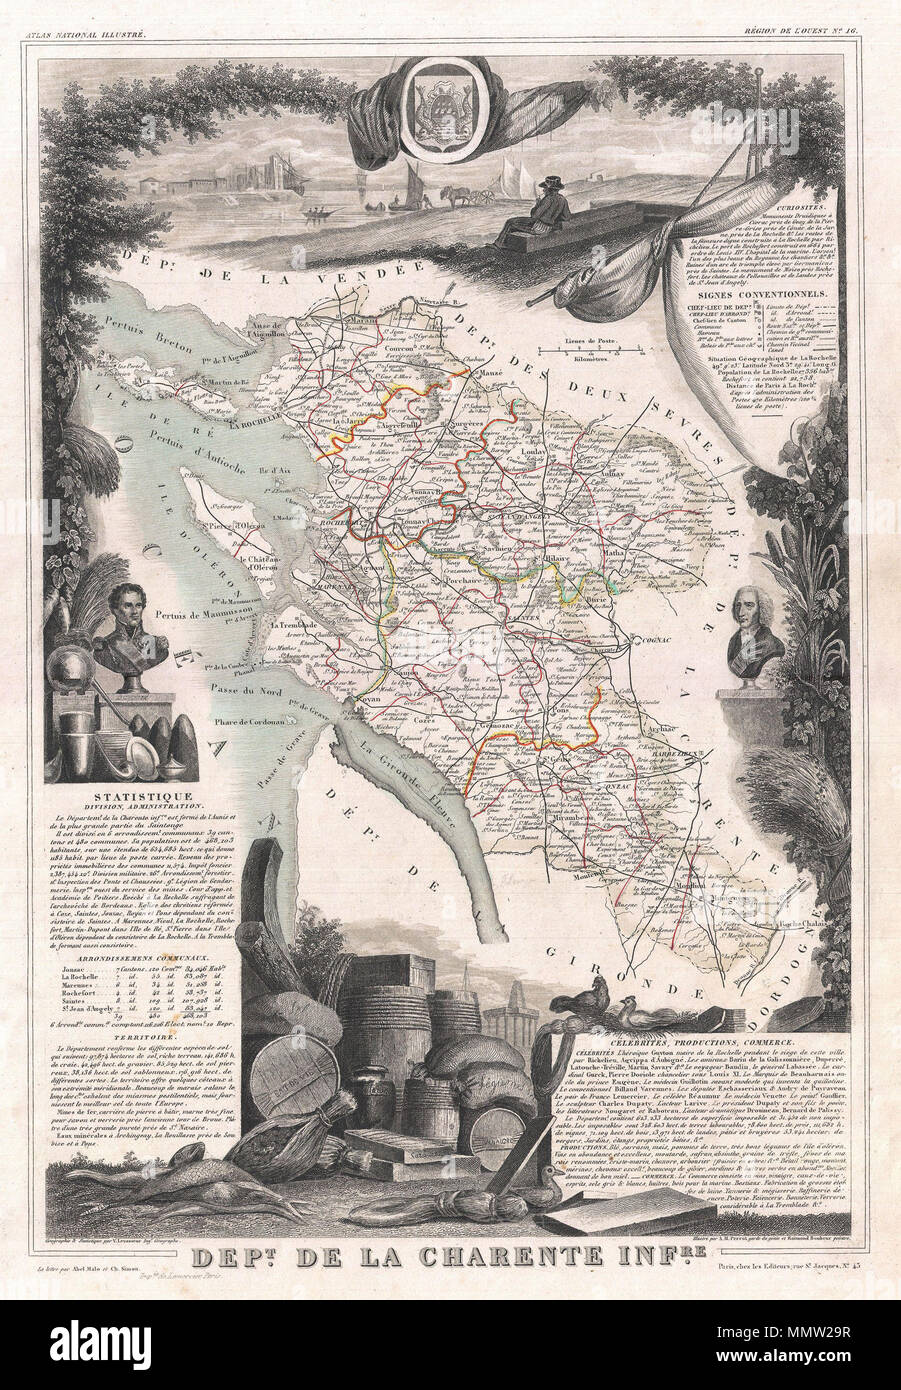 .  English: This is a fascinating 1852 map of the French department of Charente Inférieure (Charente Maritime), France. Charente Maritime is a coastal province border Charente, Dordogne, and Gironde (Bordeaux). It is best known as the producer of the world's finest Cognacs. The map proper is surrounded by elaborate decorative engravings designed to illustrate both the natural beauty and trade richness of the land. There is a short textual history of the regions depicted on both the left and right sides of the map. Published by V. Levasseur in the 1852 edition of his Atlas National de la France Stock Photo